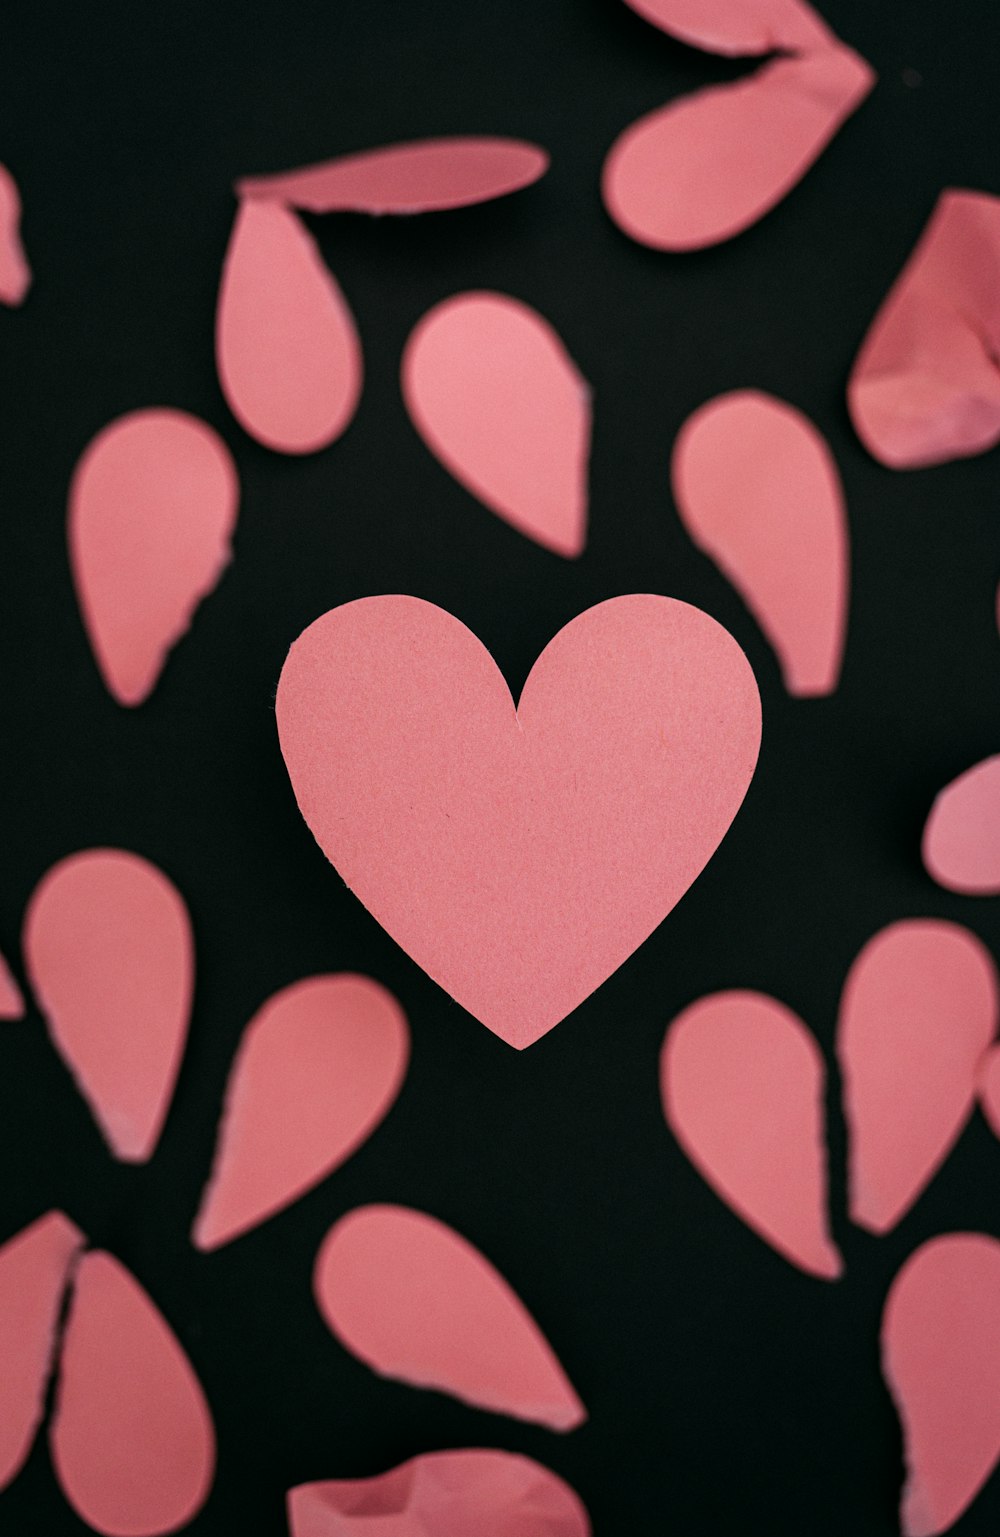 a heart surrounded by pink paper hearts